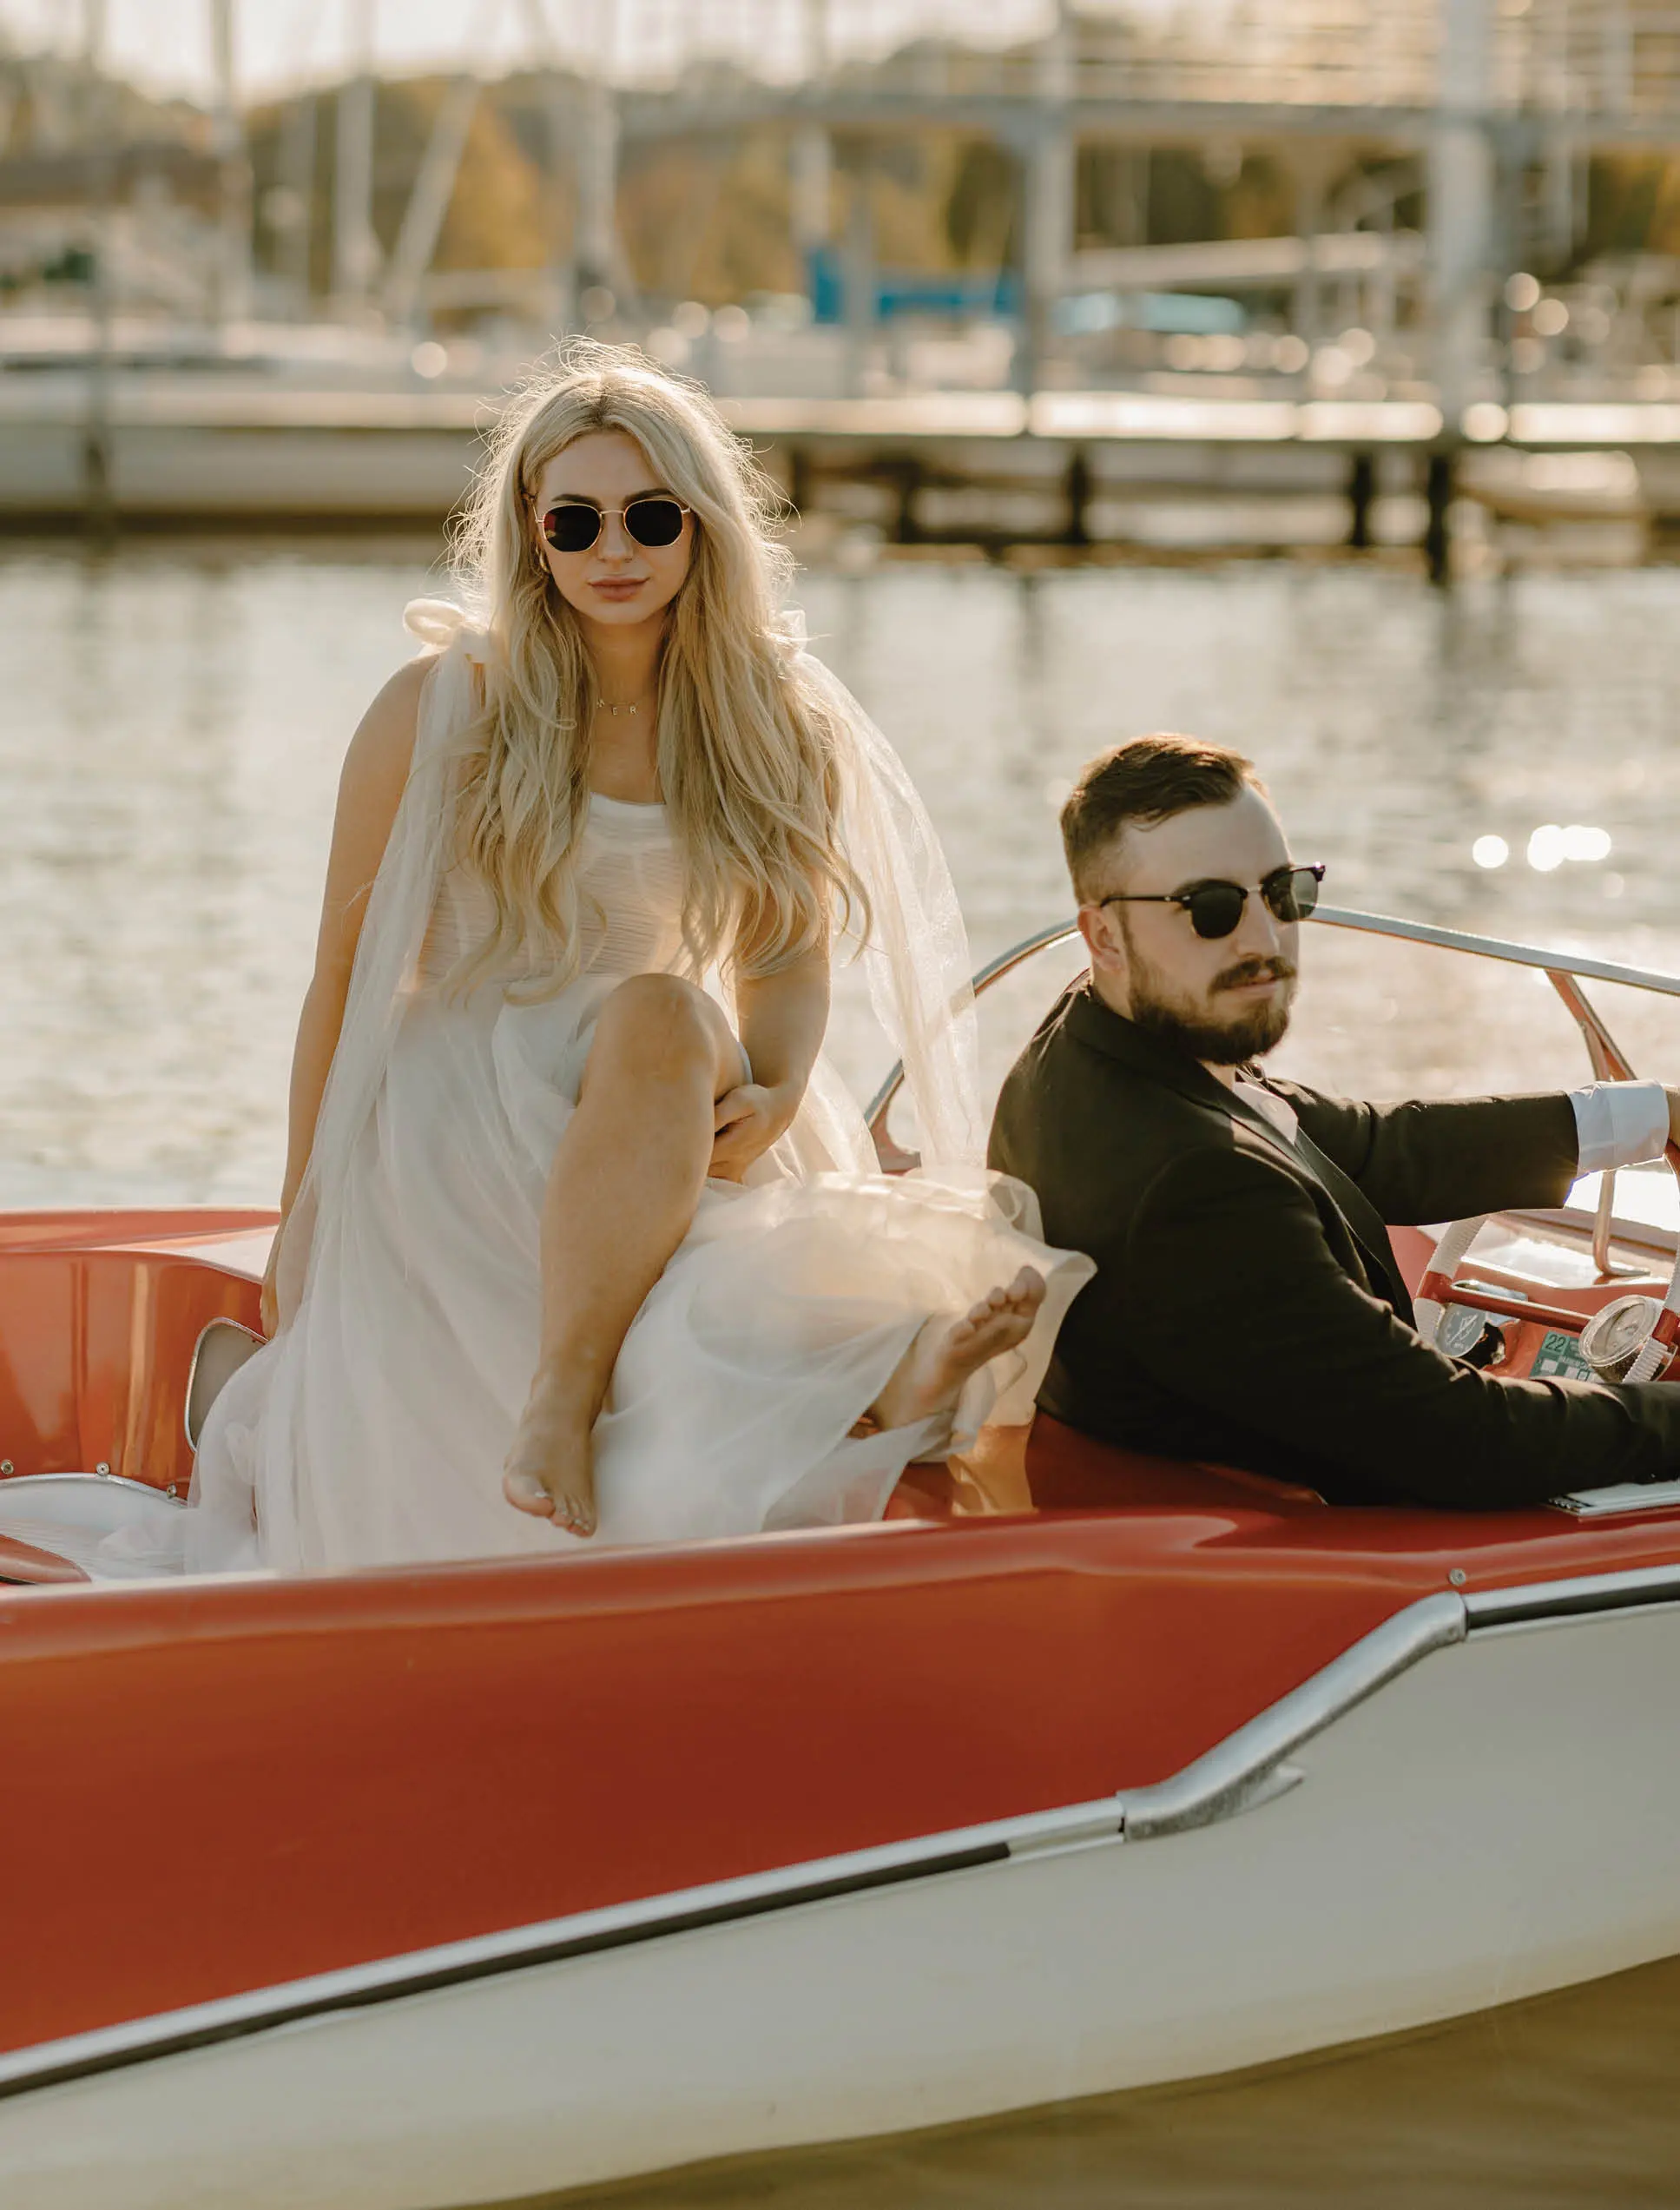 man and woman with sunglasses and straight faces sitting in a red speed boat